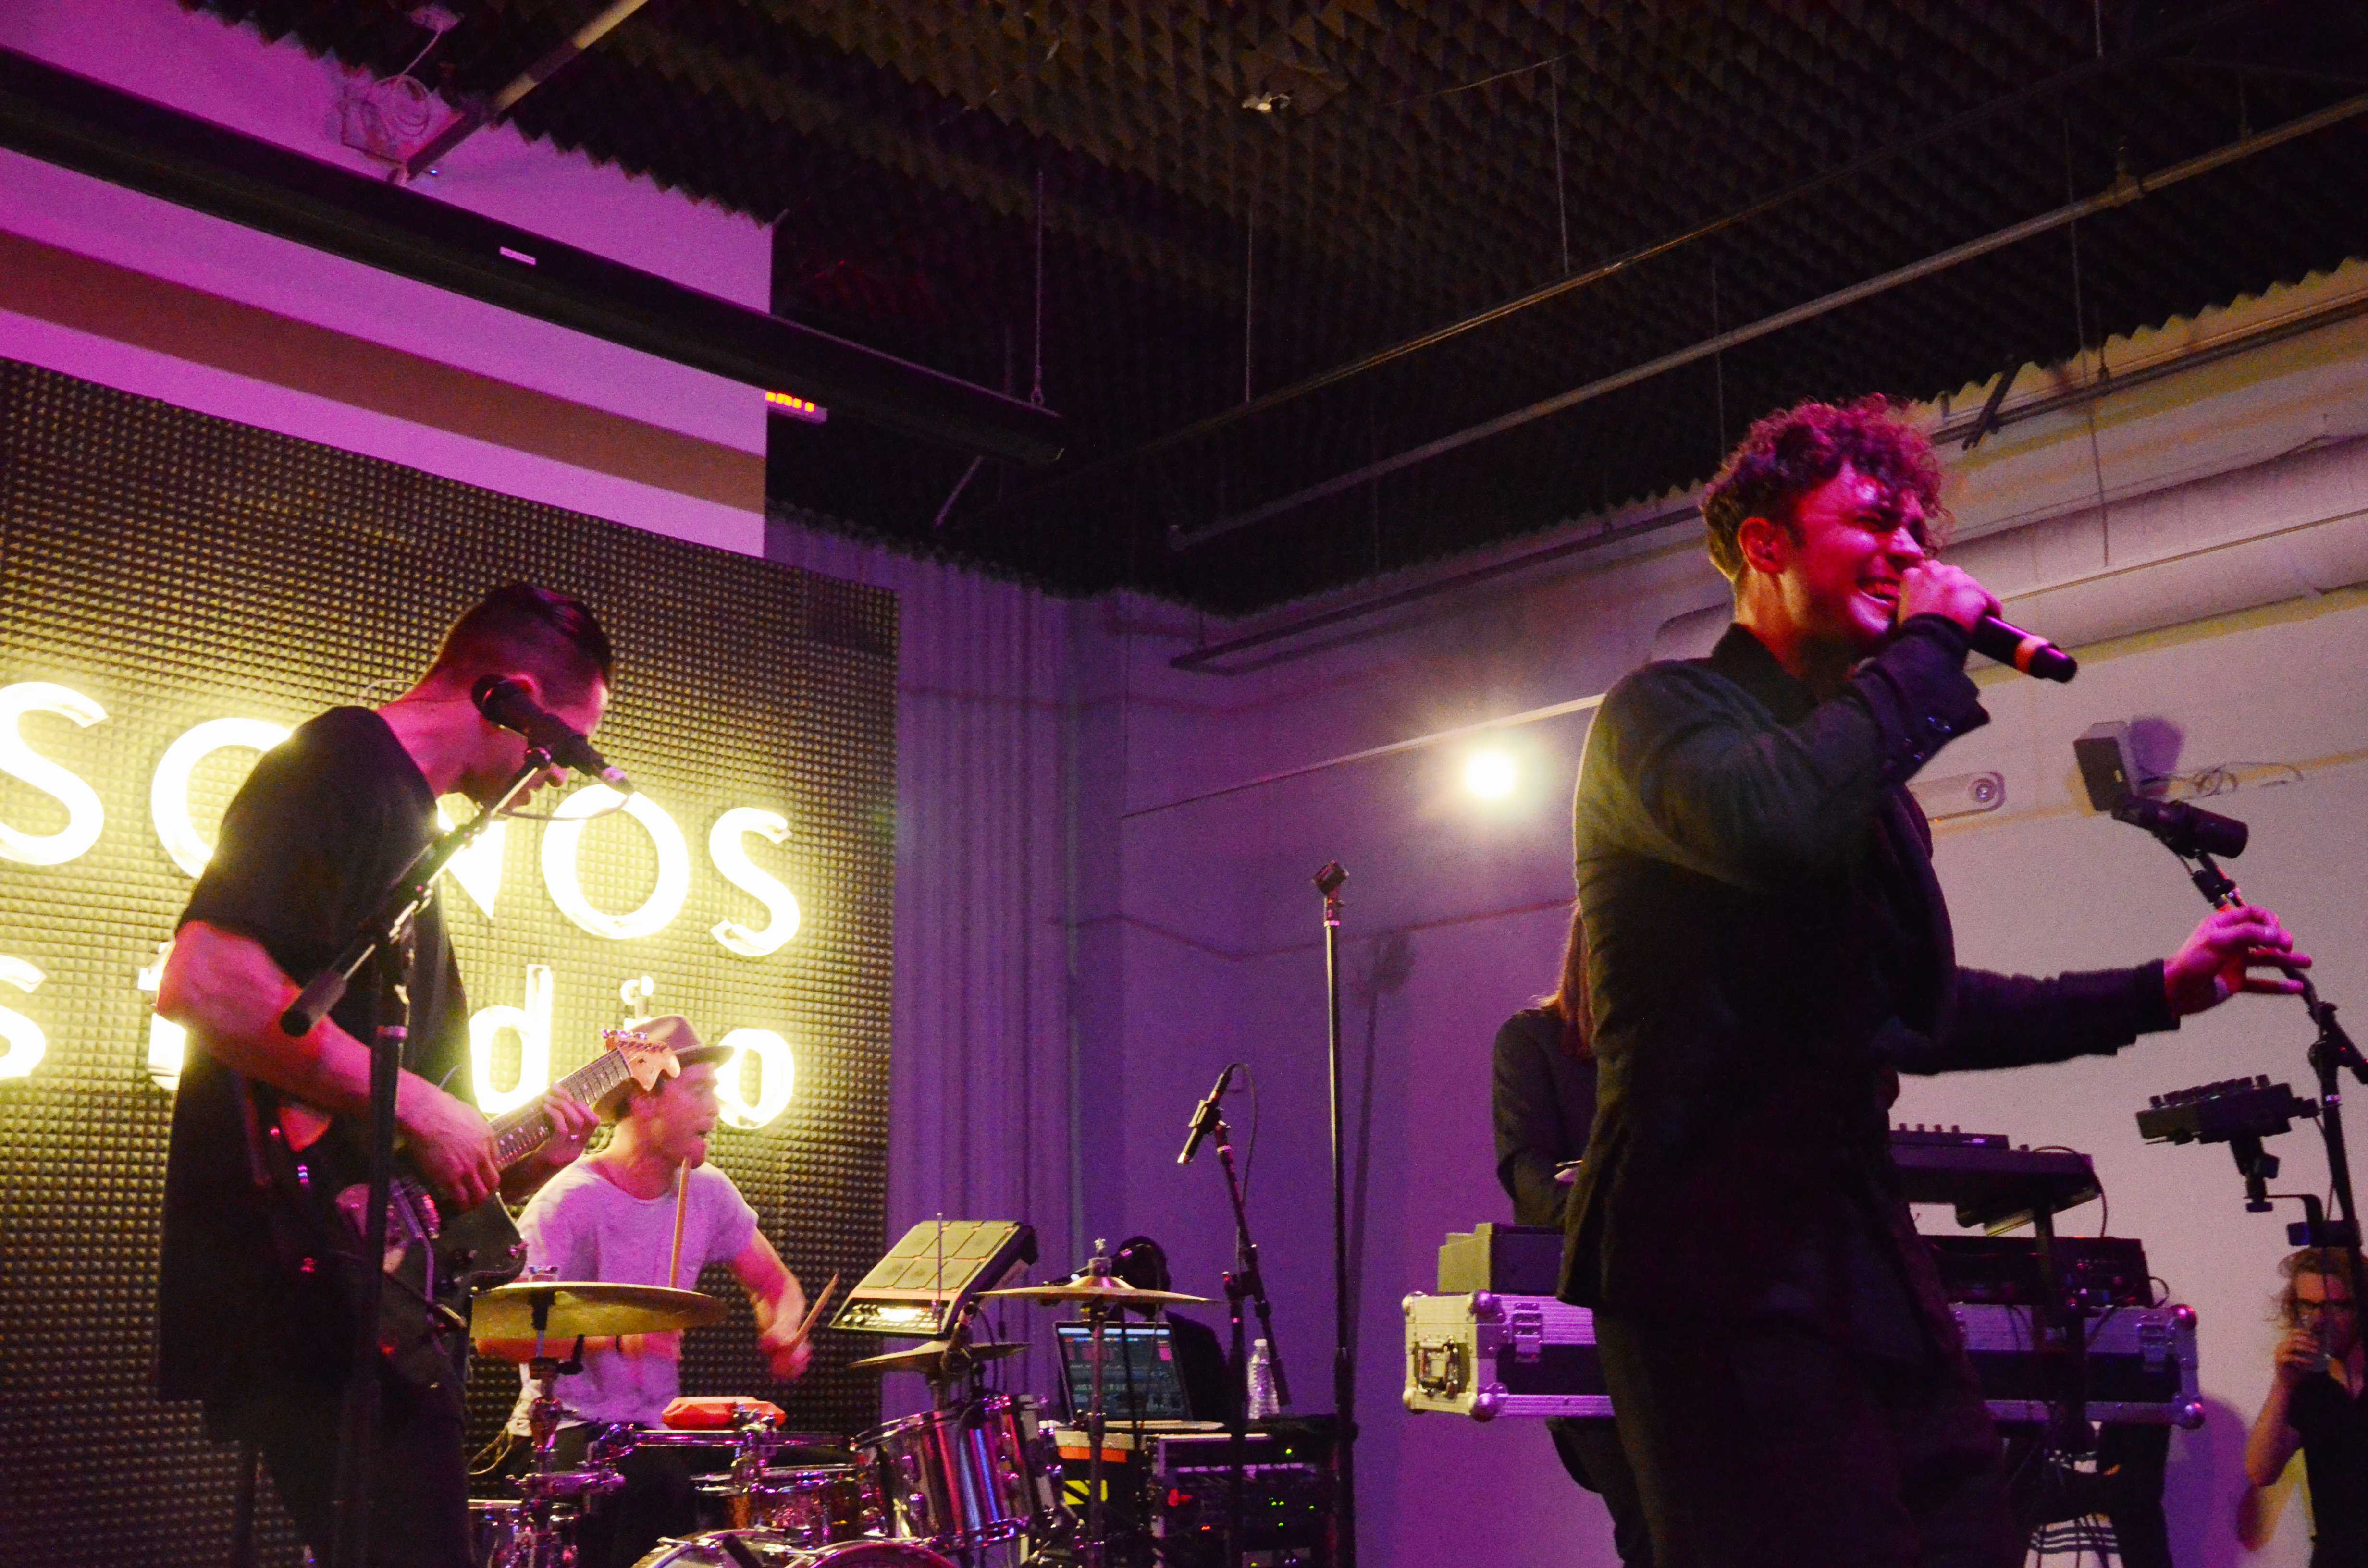 Mikky Ekko performs a small set of songs at the Sonos Studios in Hollywood presented by Pandora.